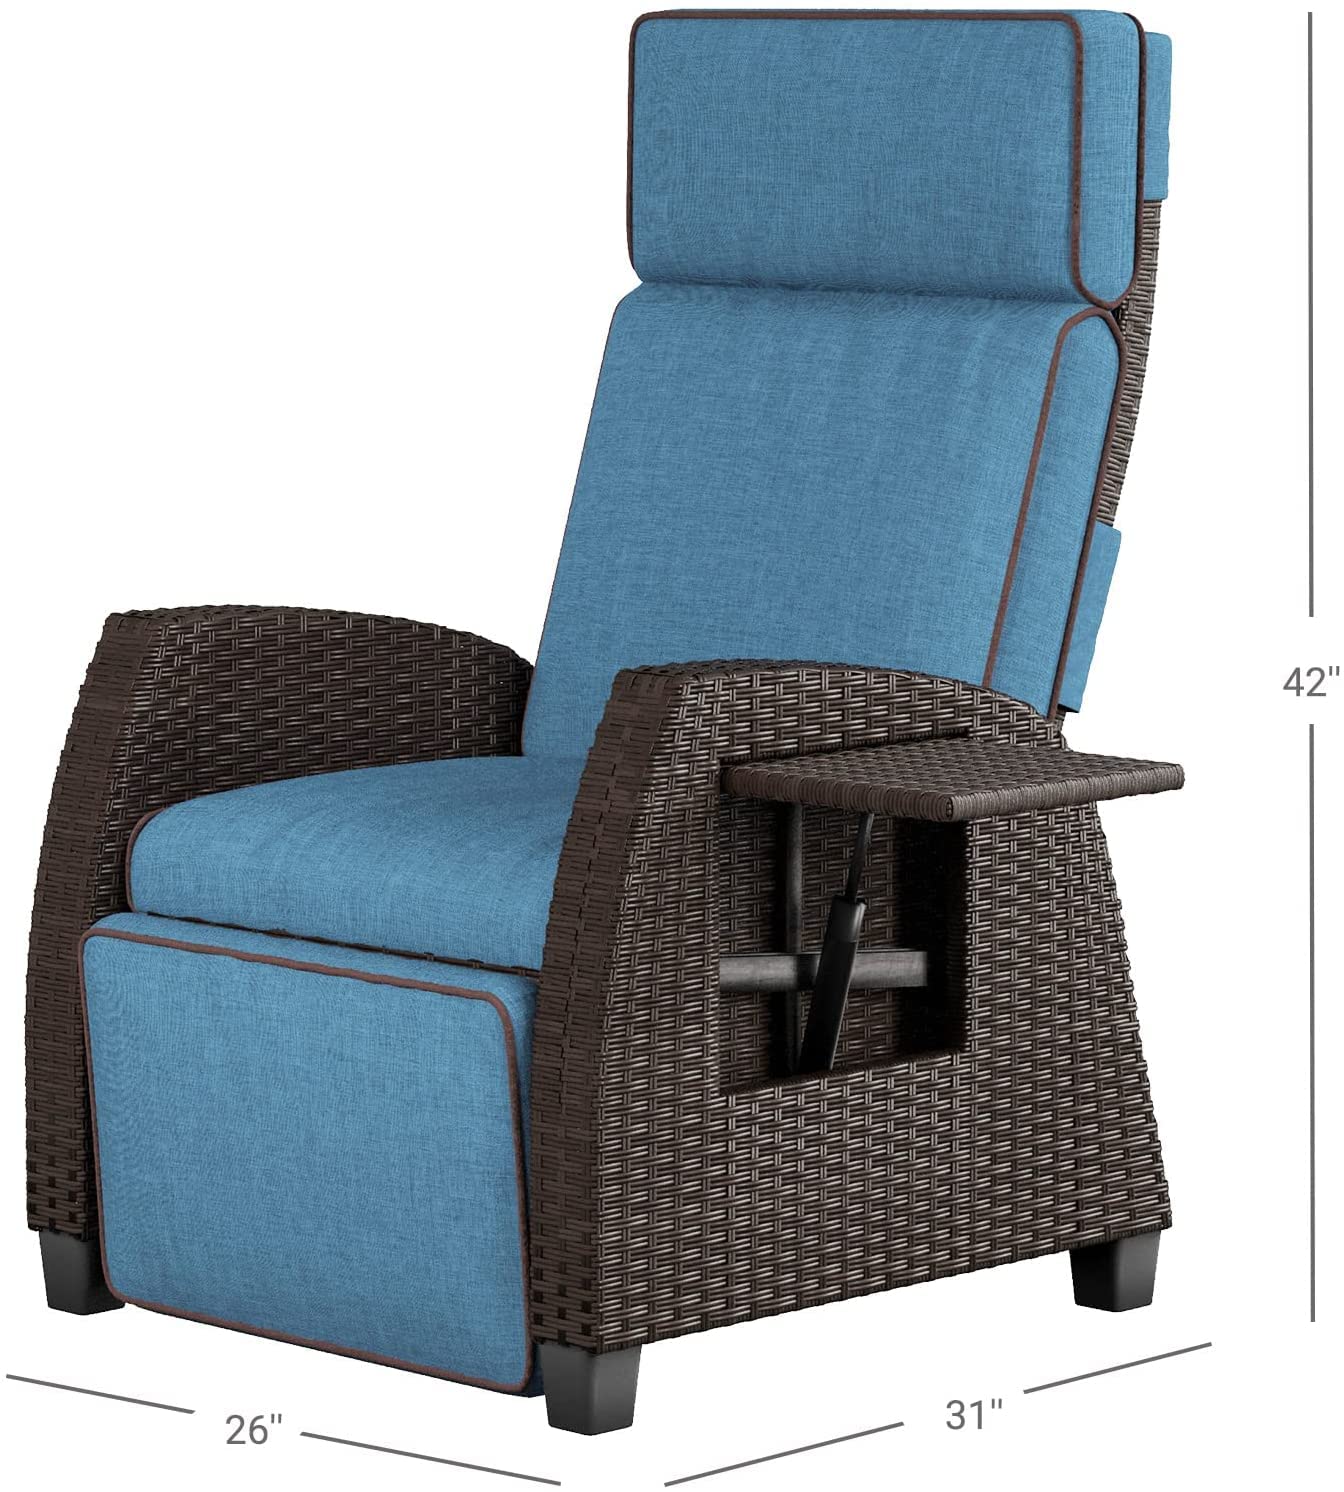 Grand patio Outdoor Recliners Set of 2 Patio Recliner Chair, All-Weather Wicker Reclining Patio Chairs, Flip-up Side Table, Recliner Chair, Peacock Blue Peacock Blue 2pcs 2 PCS